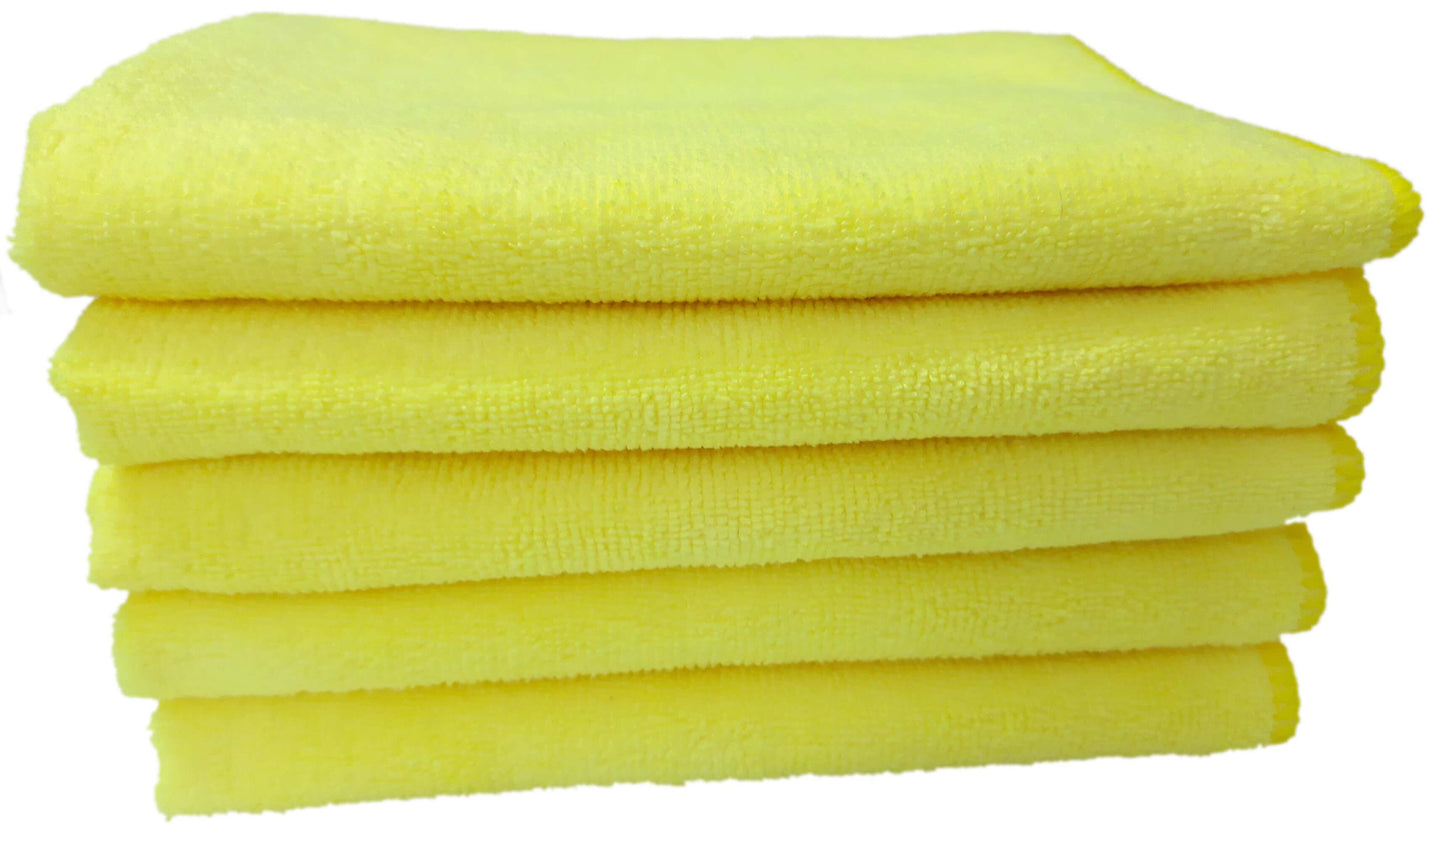 Multi purpose Microfiber cleaning cloths for Home, Kitchen, Cars & bike - 5 Pcs